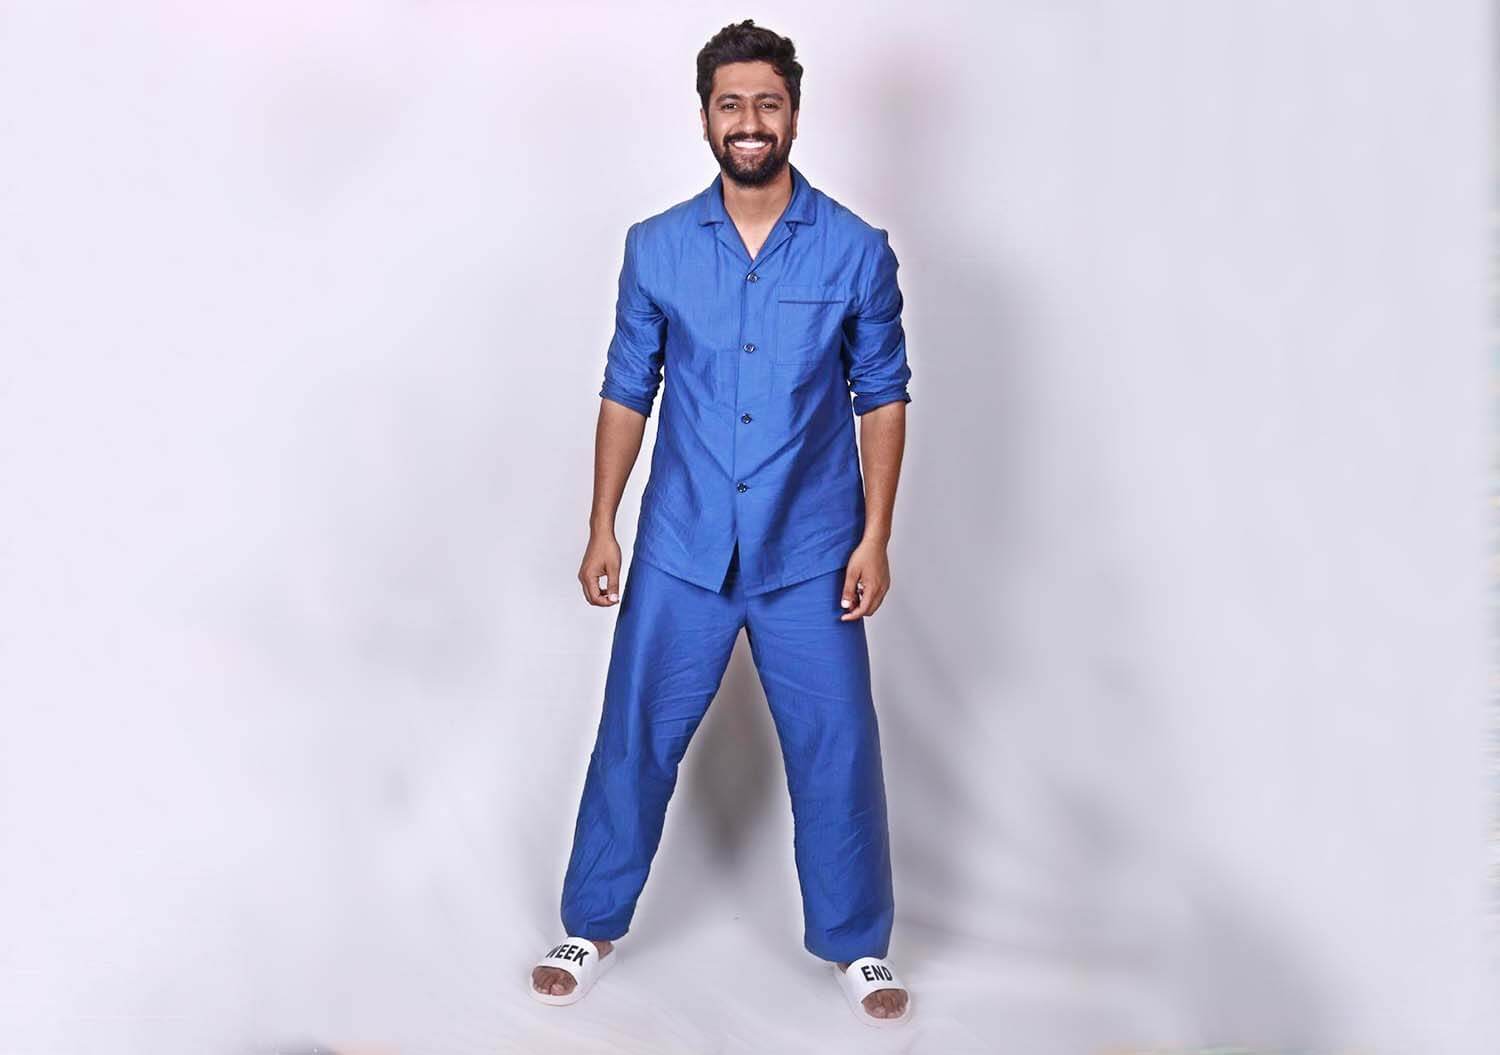 Vicky Kaushal Sets a New Style Trend as He Rocks the Pajama Suit!